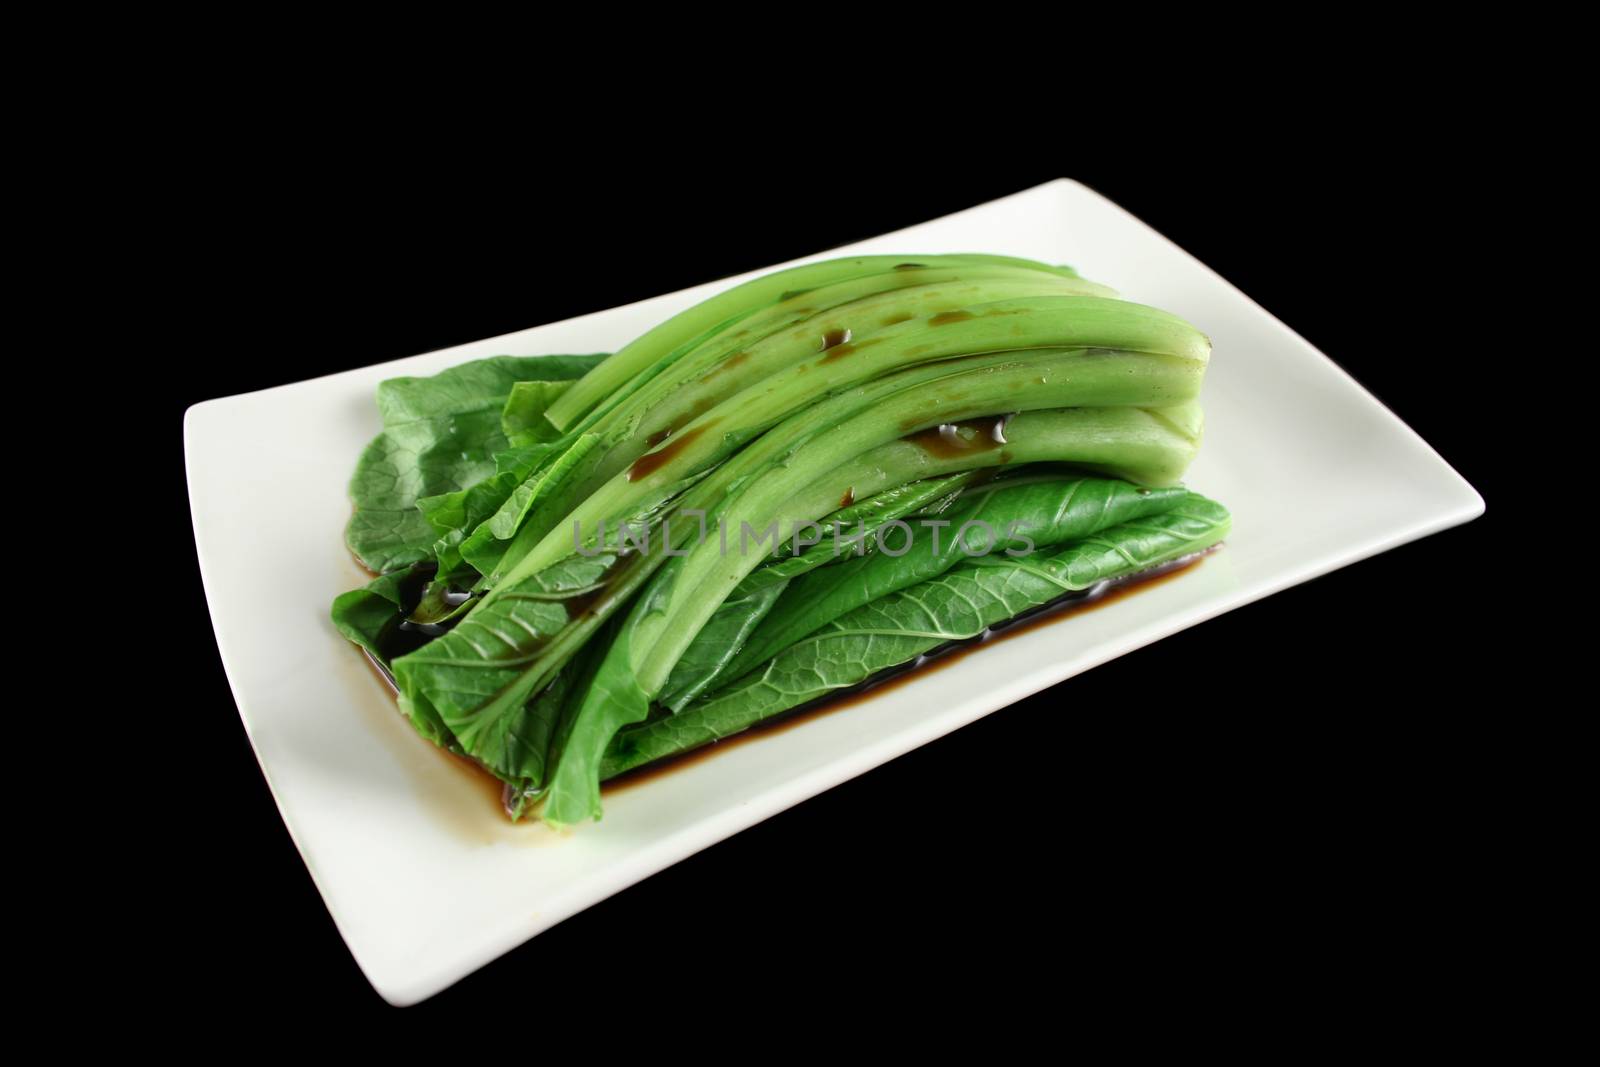 Soy sauce poured over the Asian vegetable Choy Sum.